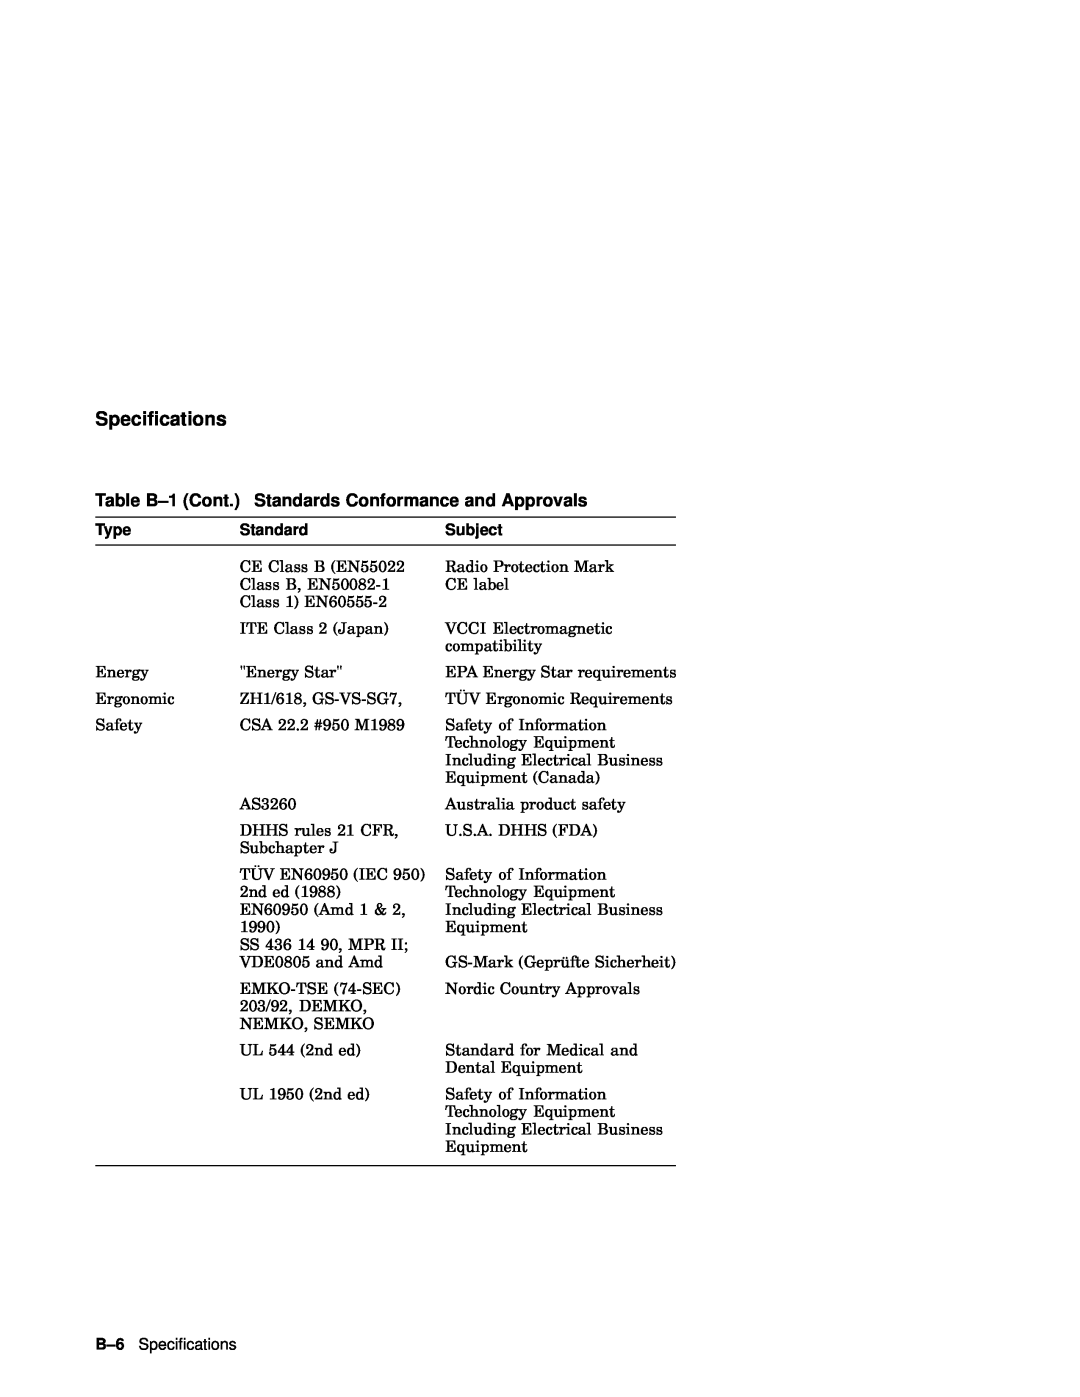 IBM WS525 manual Table B-1 Cont. Standards Conformance and Approvals, Speciﬁcations, Type, Subject 